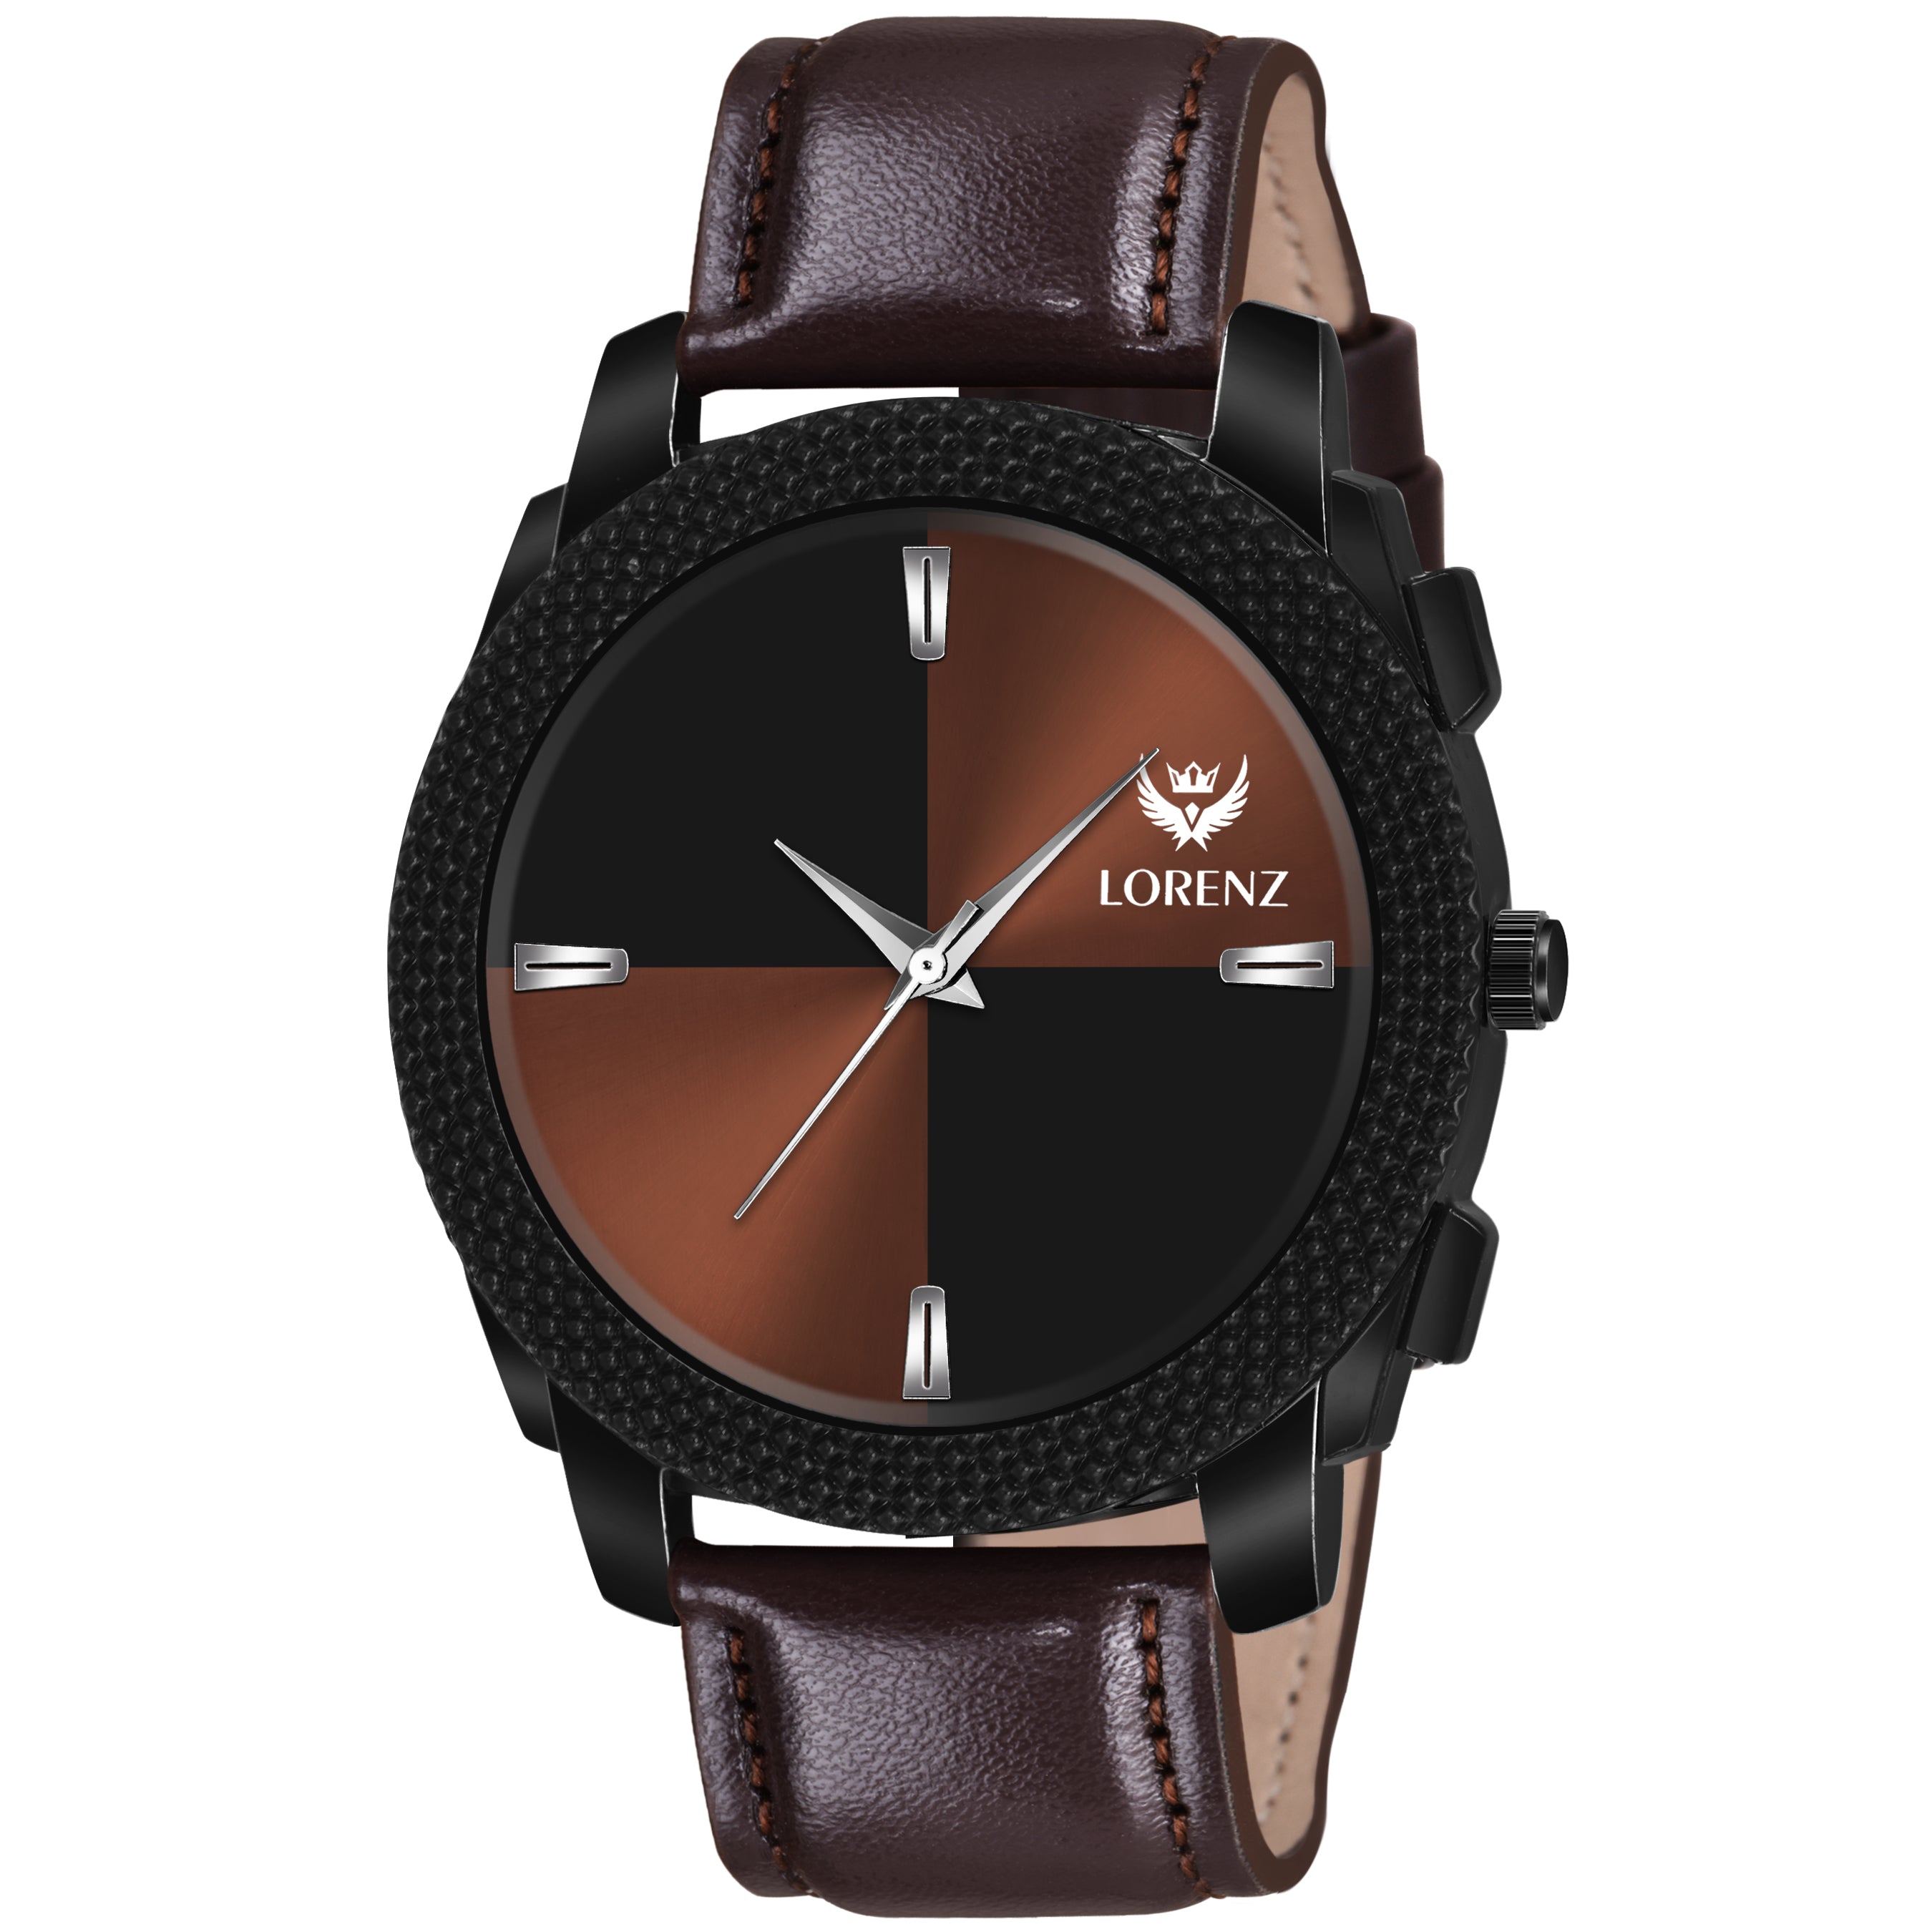  Black Dial Brown Leather Strap Watch 